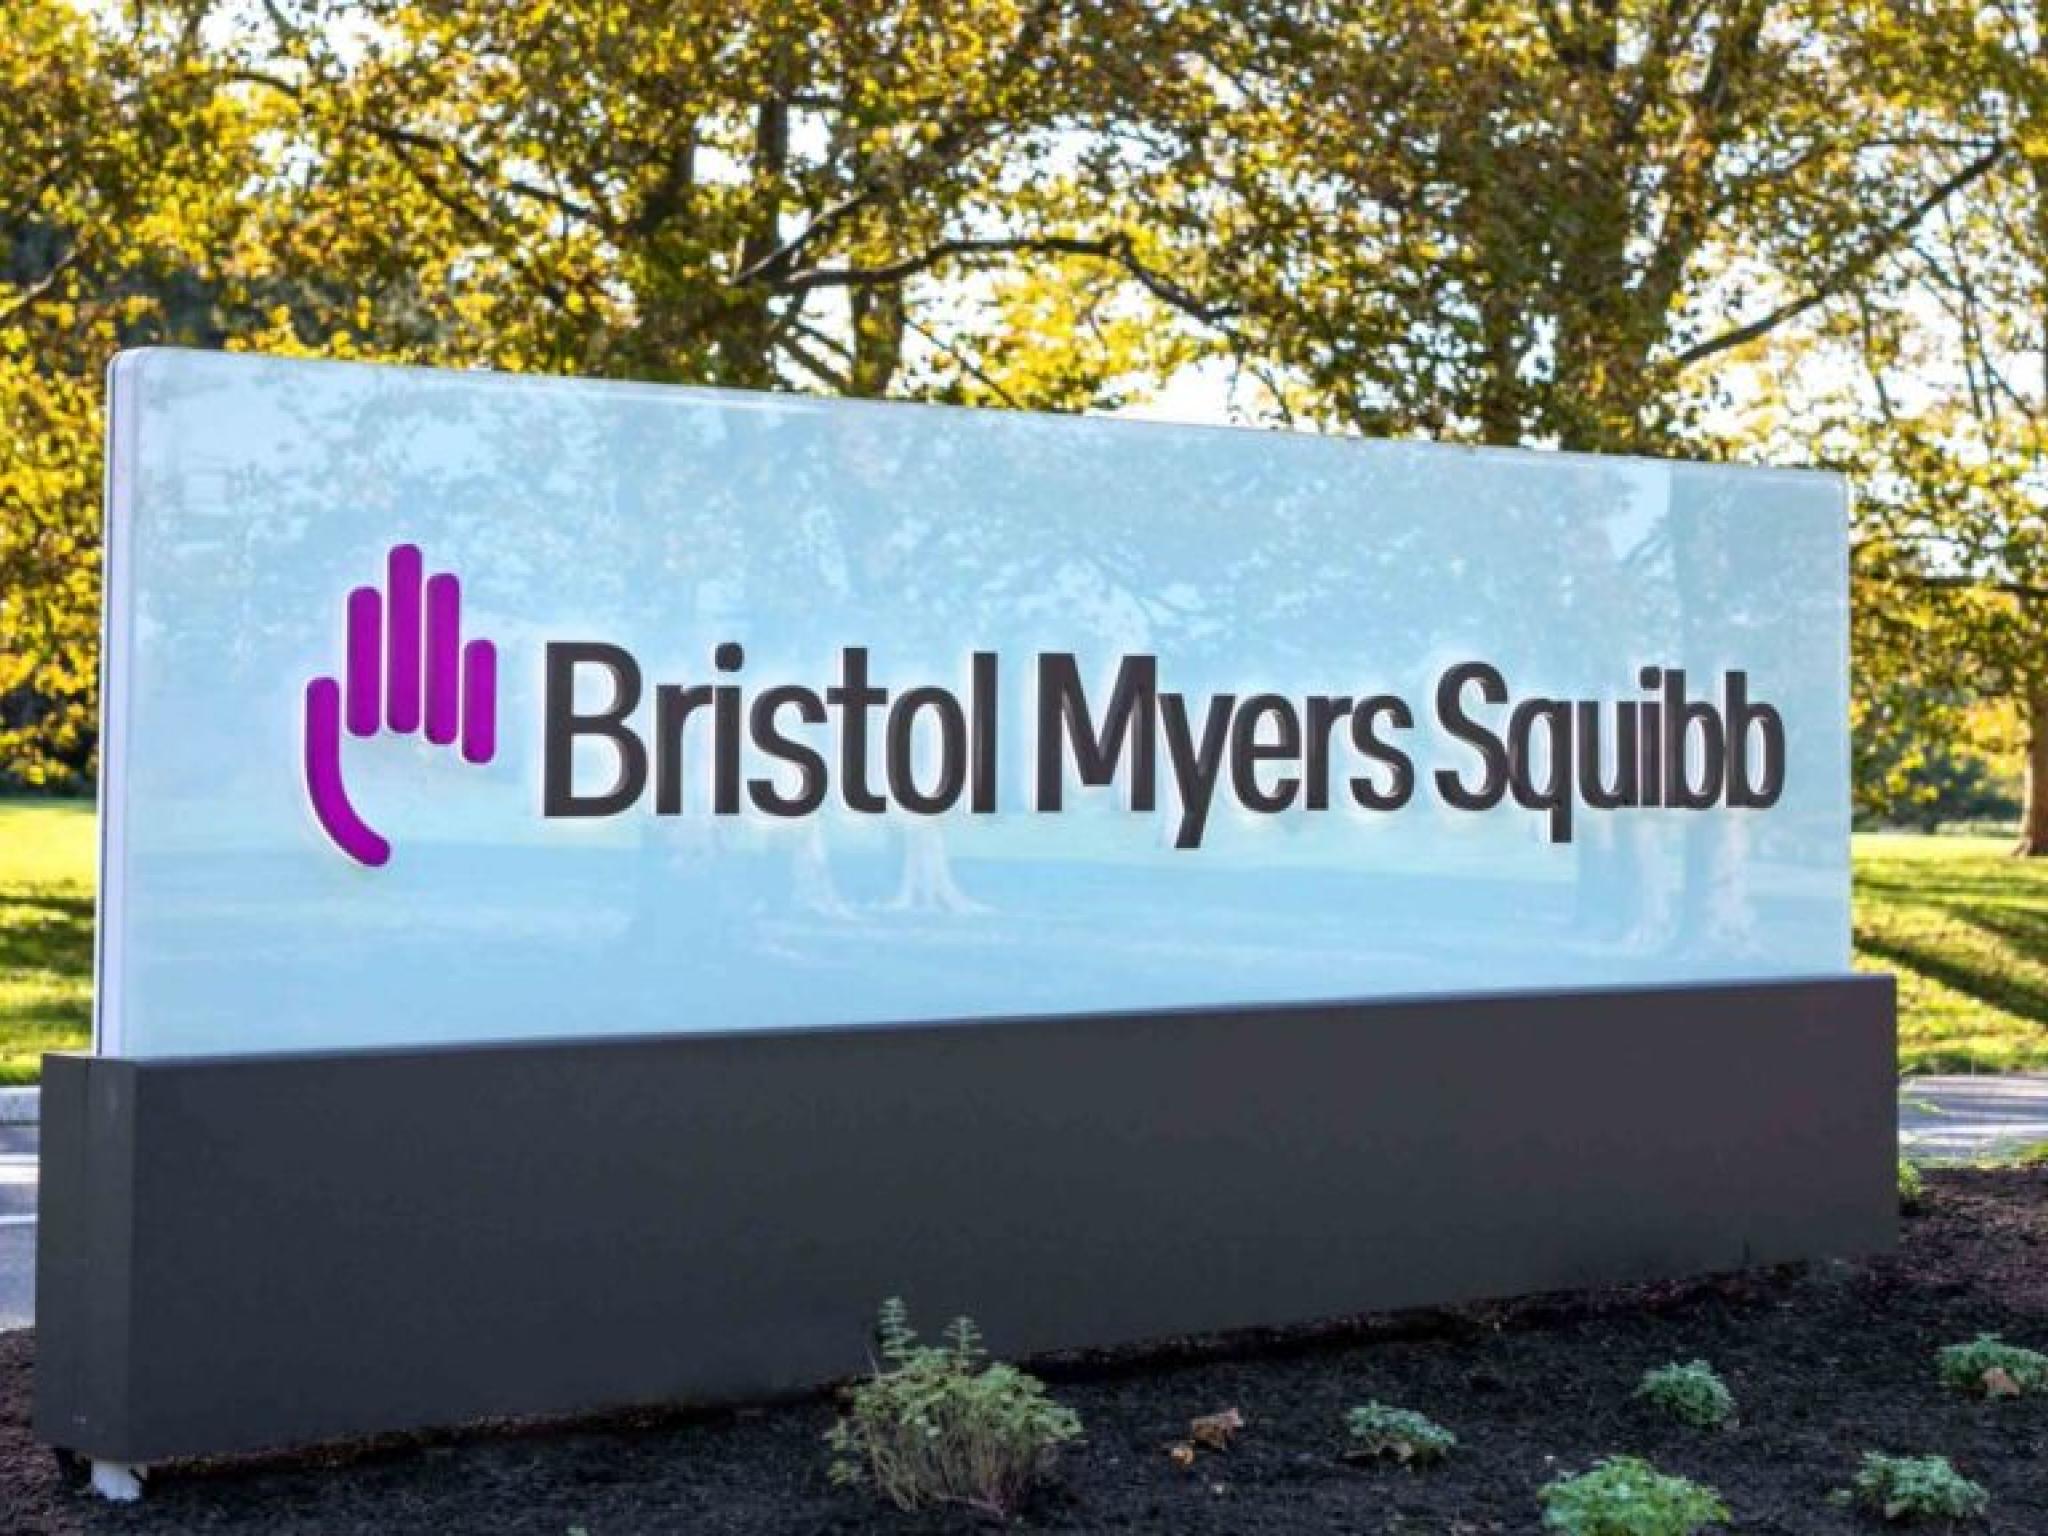  fda-approves-bristol-myers-squibbs-combination-therapy-for-colorectal-cancer-patients-with-certain-type-of-gene-mutation 